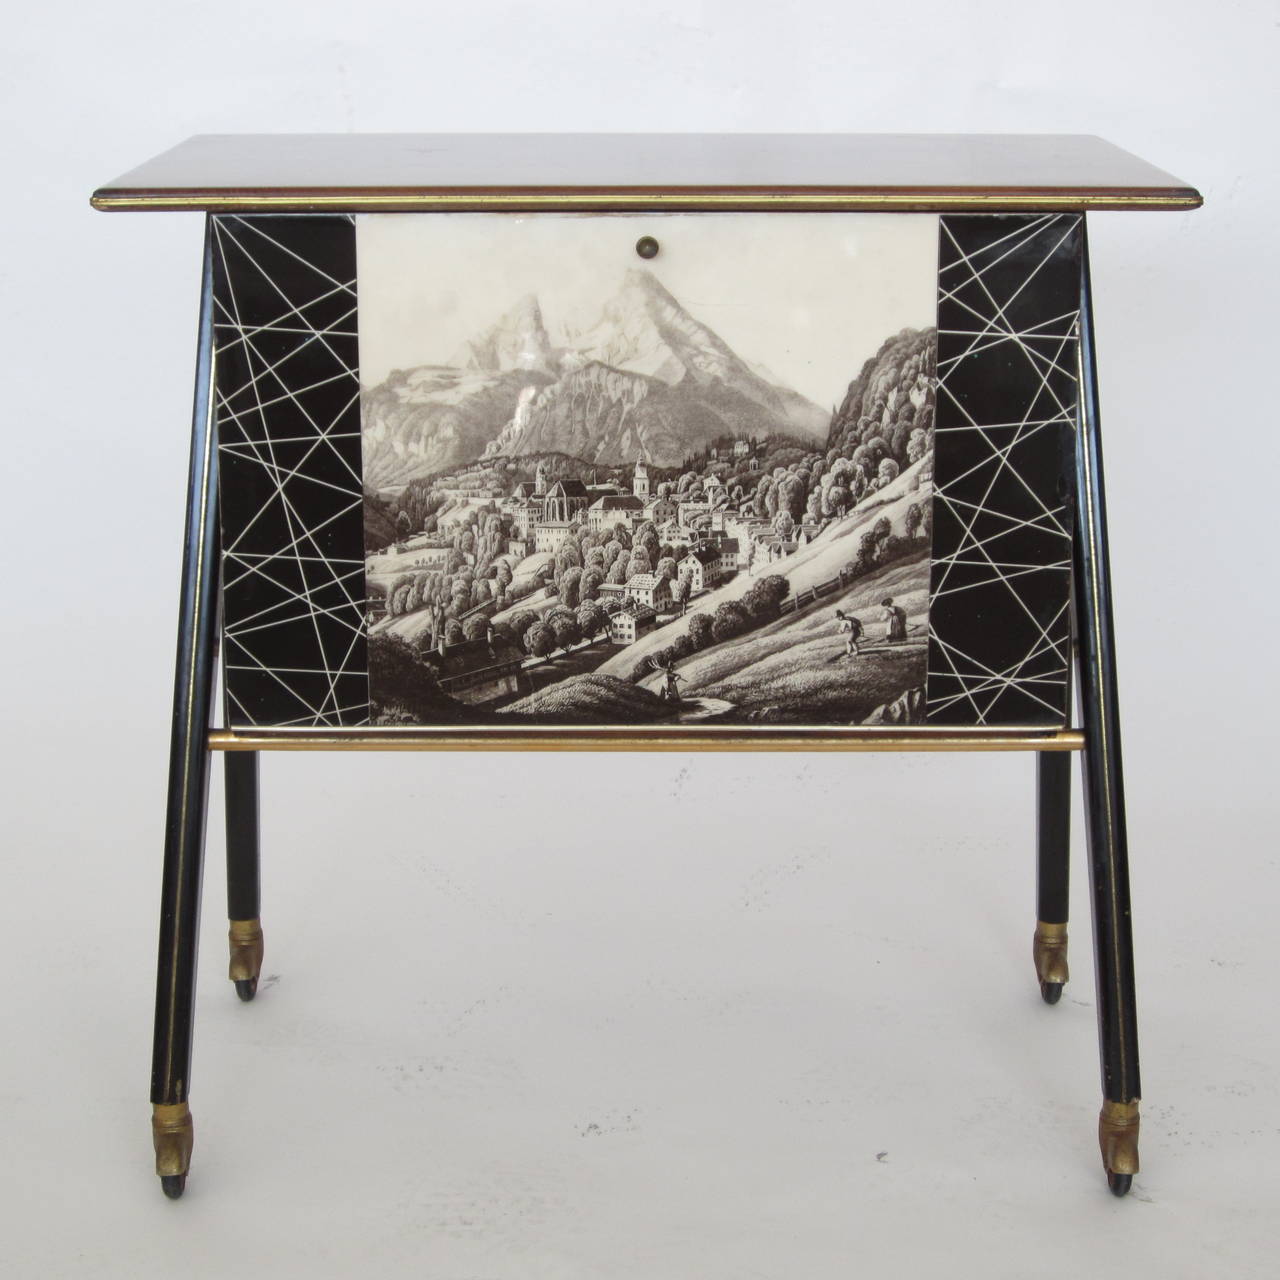 Fantastic Italian bar on four A-frame legs with original wheels in fine working condition. The front design on the door depicts a mountainous scene in Italy with black and white 1950s motif flanking it. When door opens it reveals this great crackled